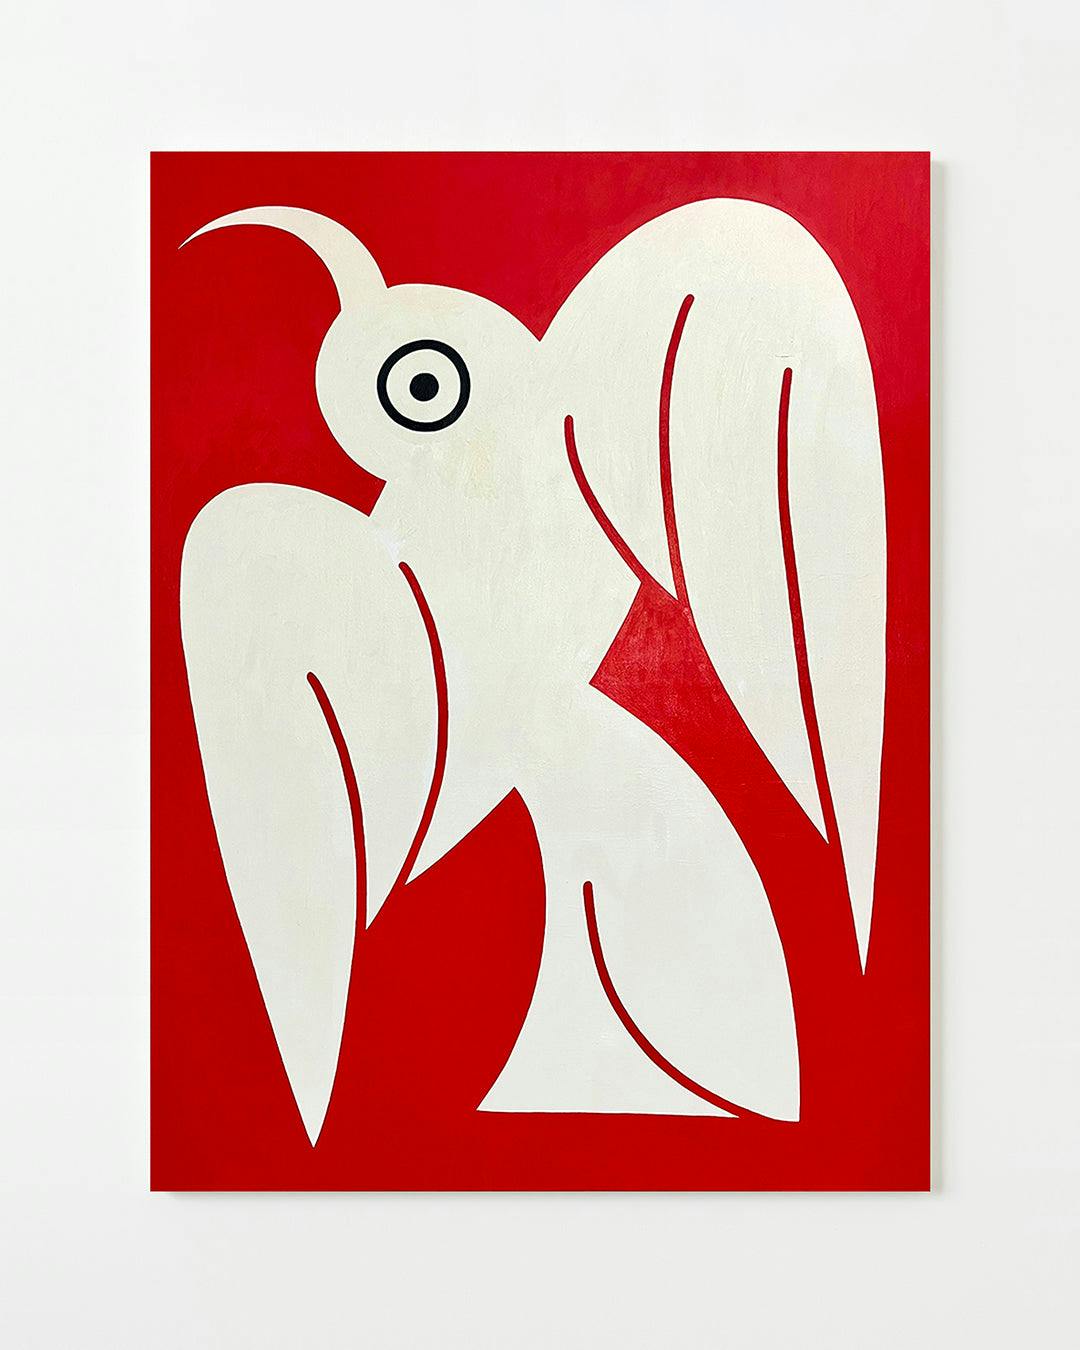 Painting by Eddie Perrote titled "White Bird".